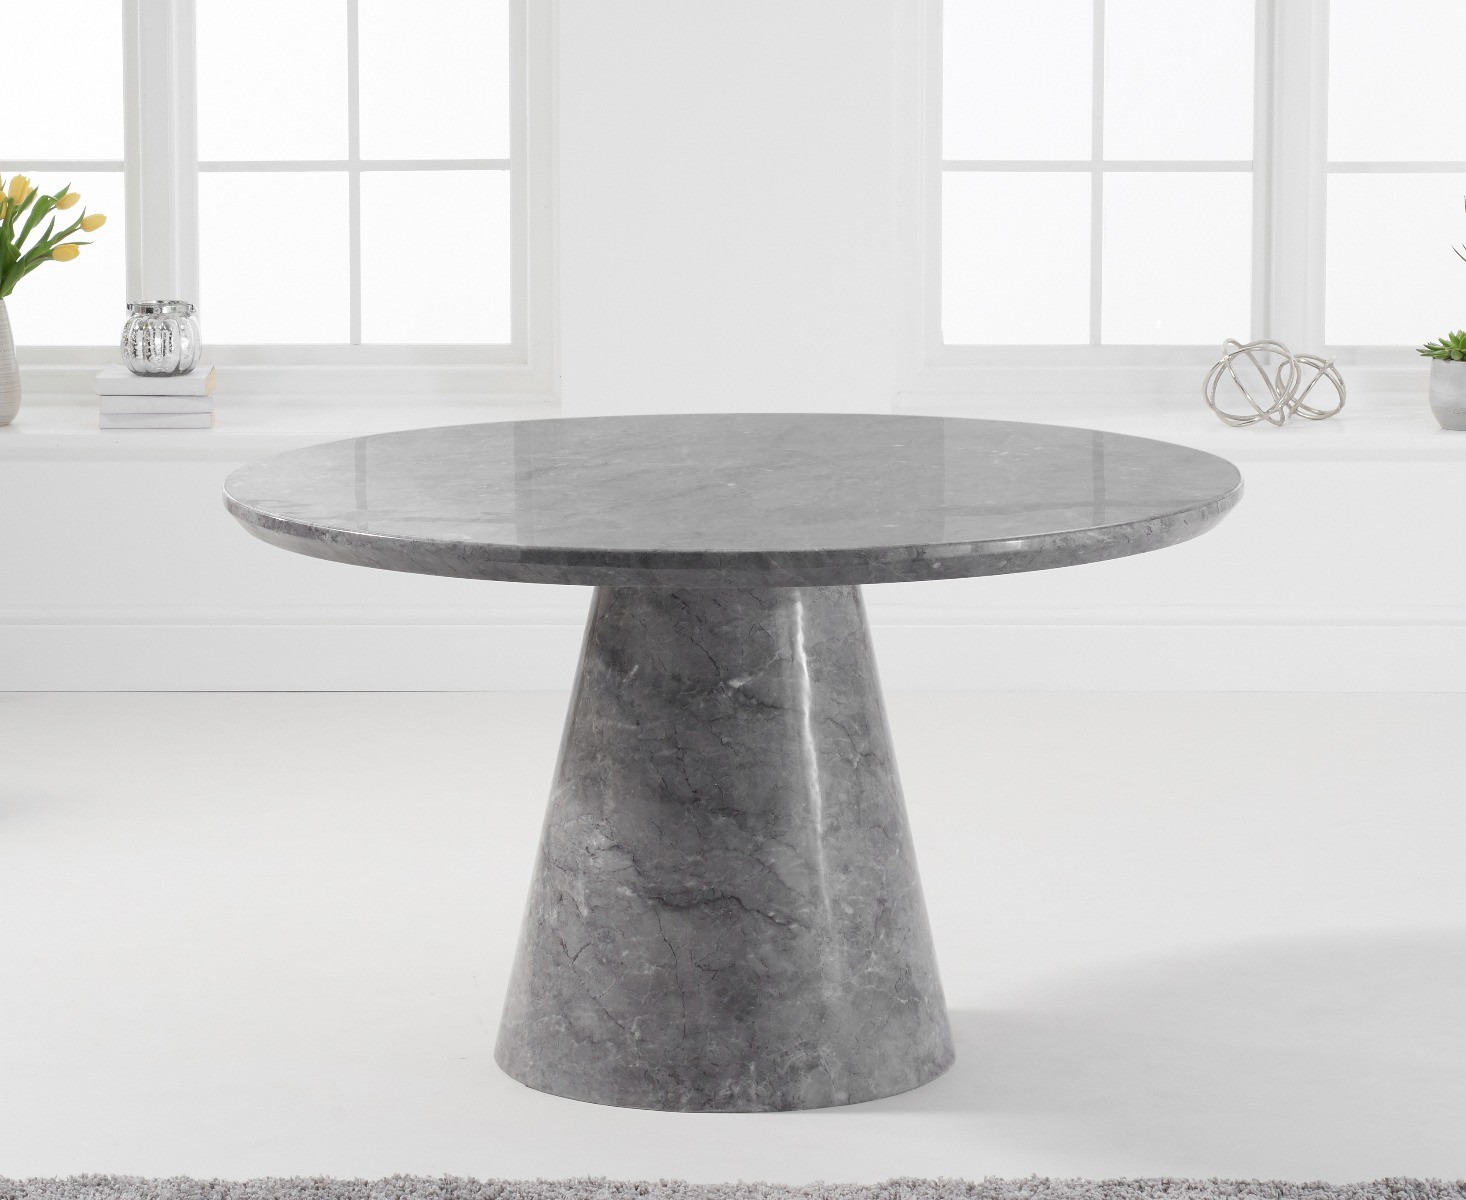 Photo 1 of Ravello 130cm round grey marble dining table